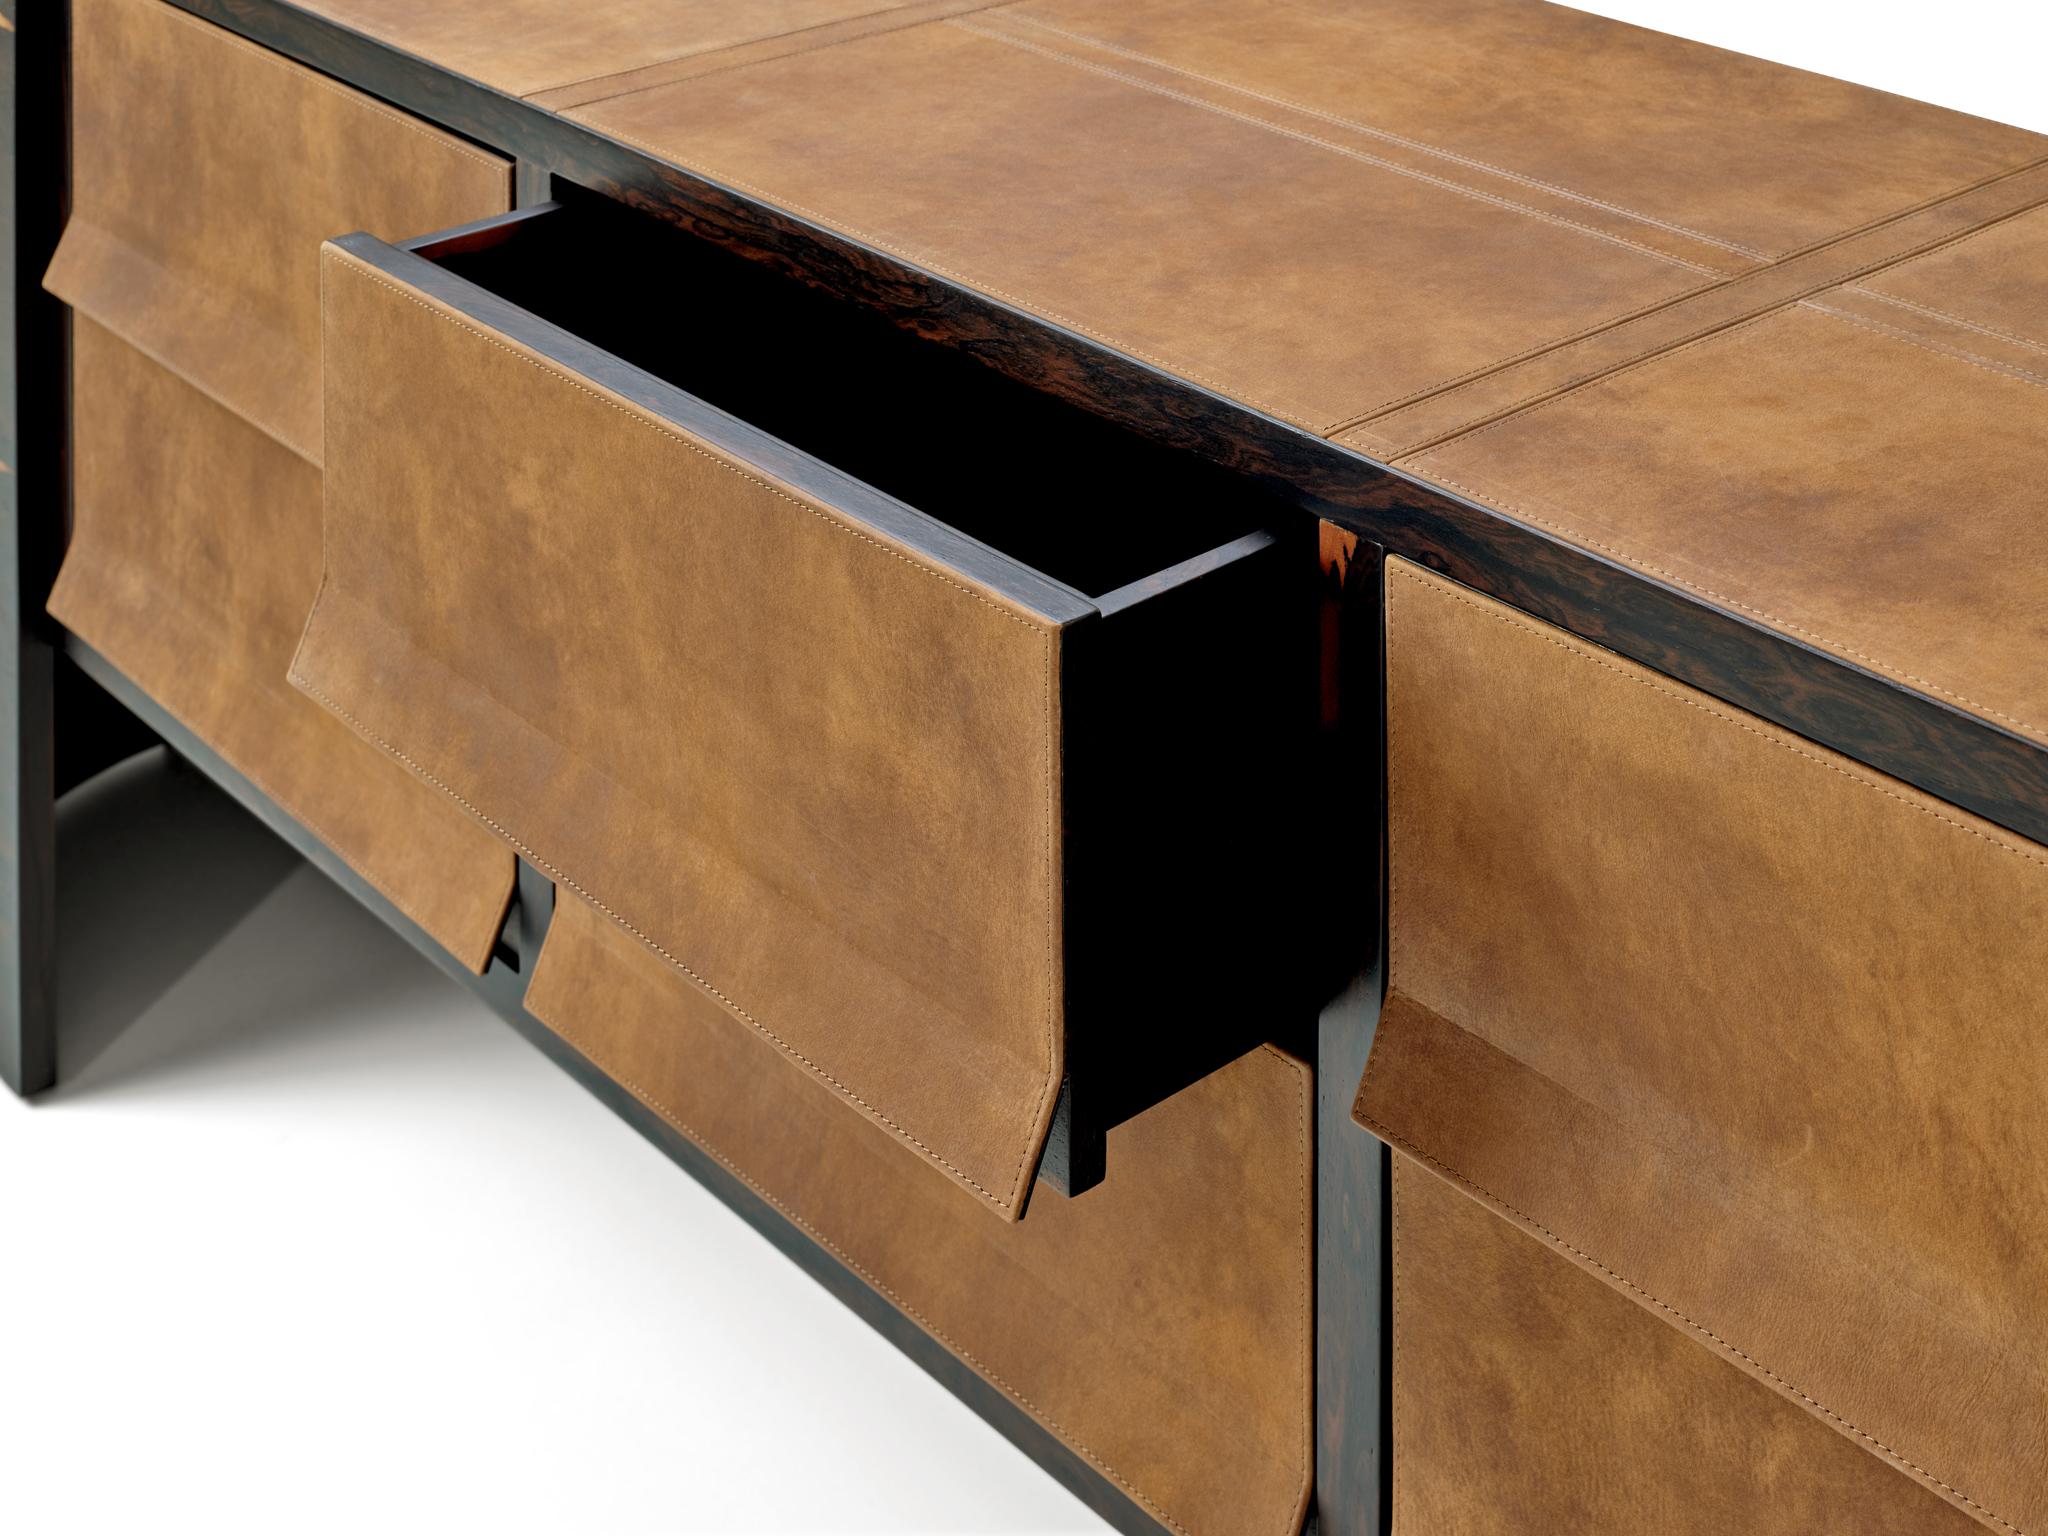 The Cais sideboard is more than just a piece of furniture - it's a statement of style and sophistication that will bring a unique identity to any space. Each technique used in its creation is a testament to our commitment to quality and excellence,